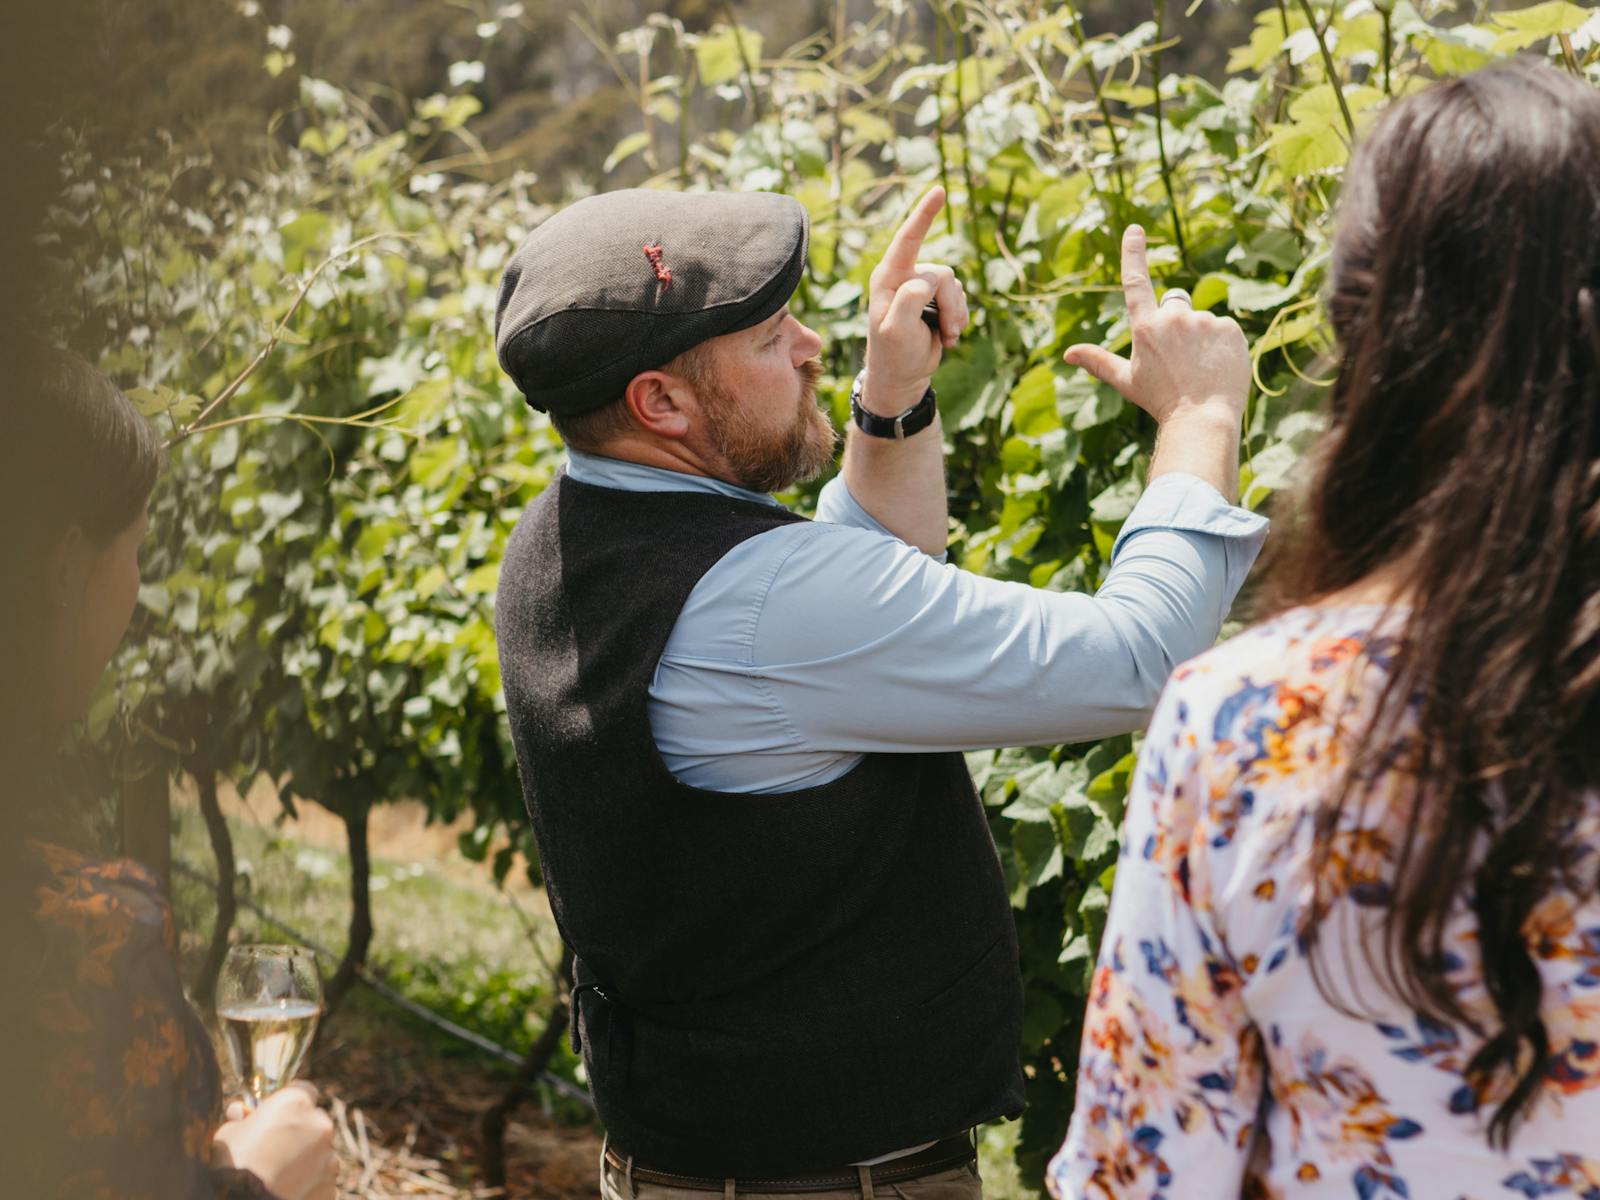 Guides will show our viticulture and history in an immersive vineyard setting.